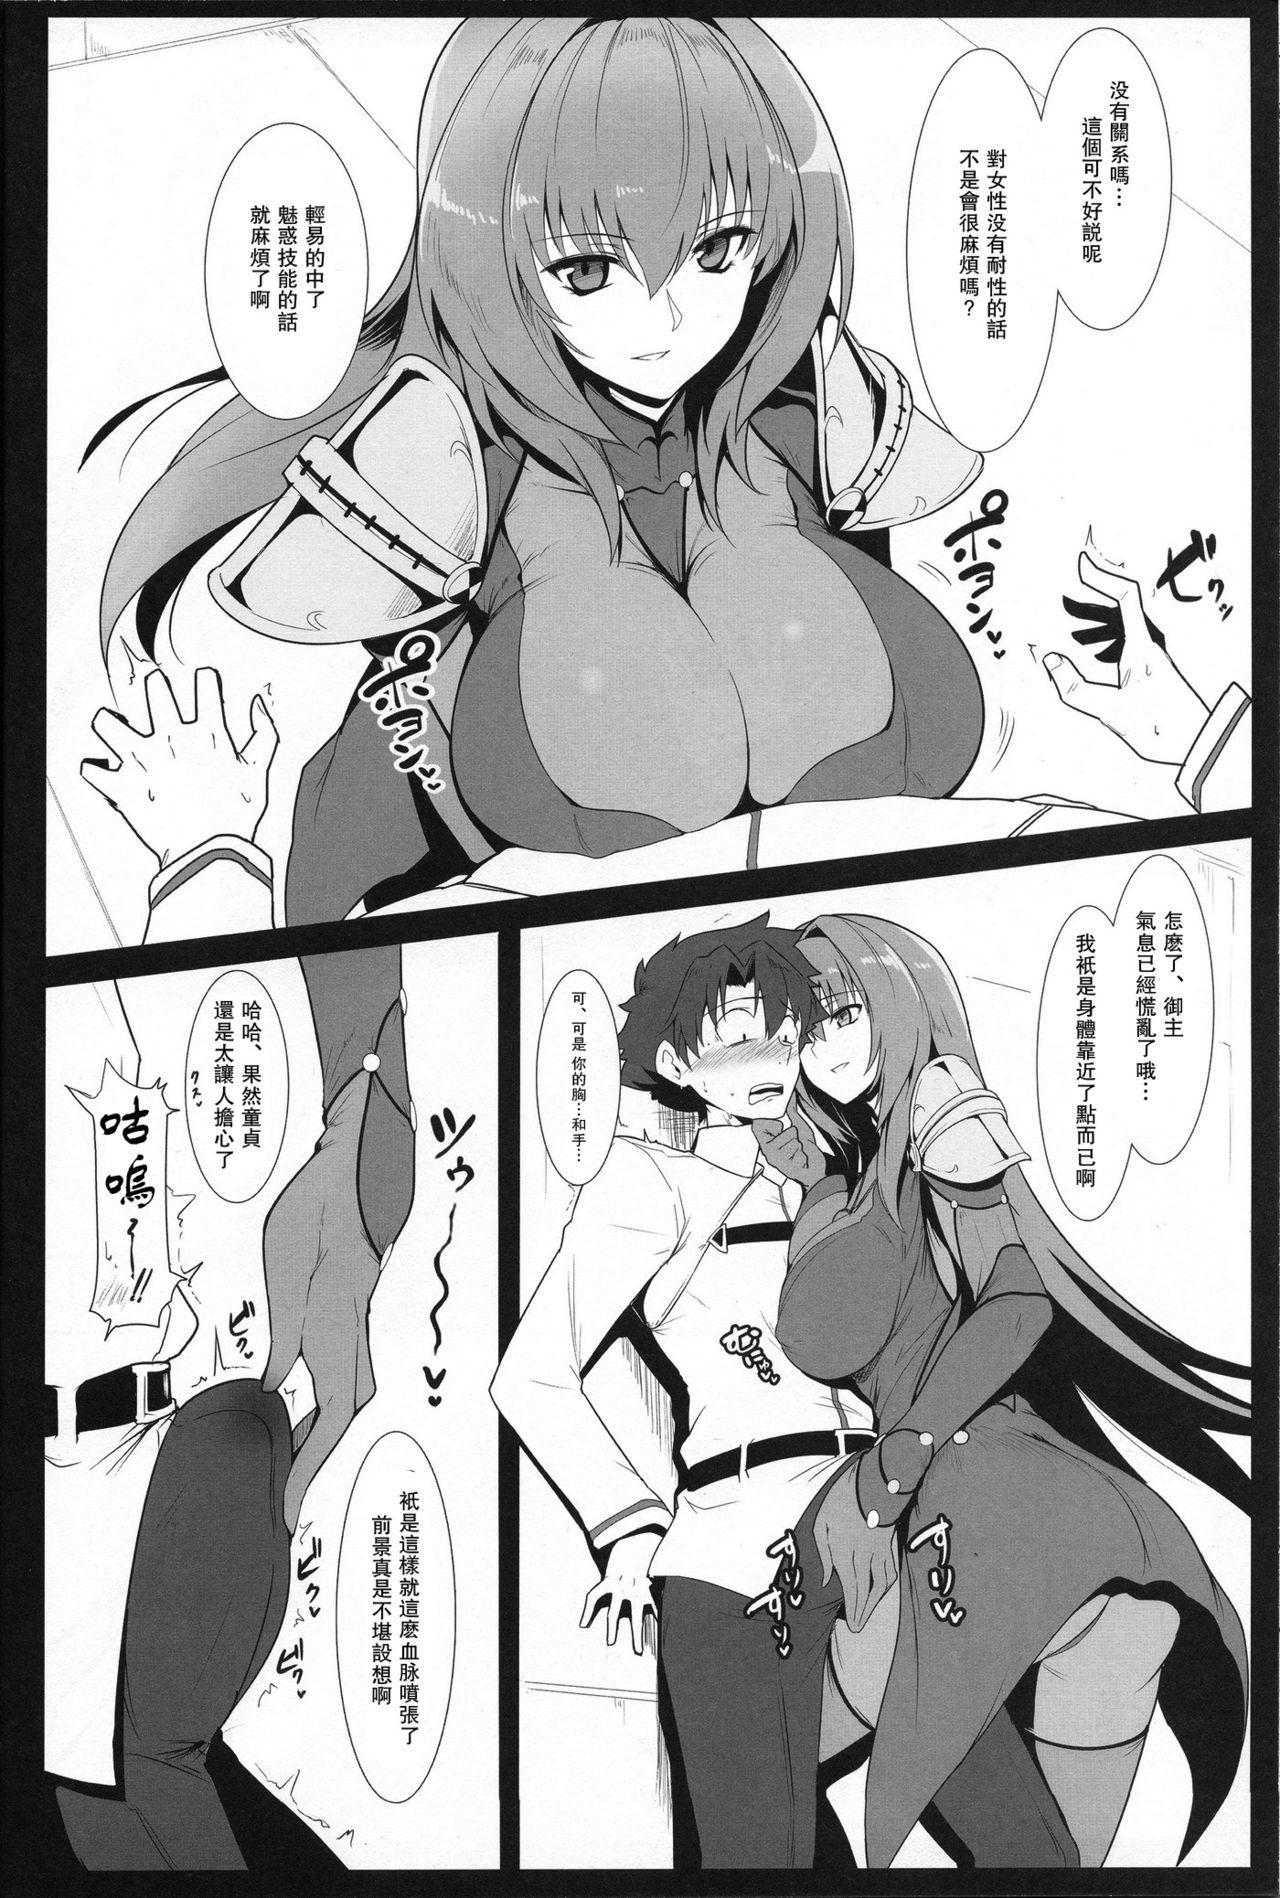 Spreadeagle AH! MY MISTRESS! - Fate grand order Leaked - Page 5